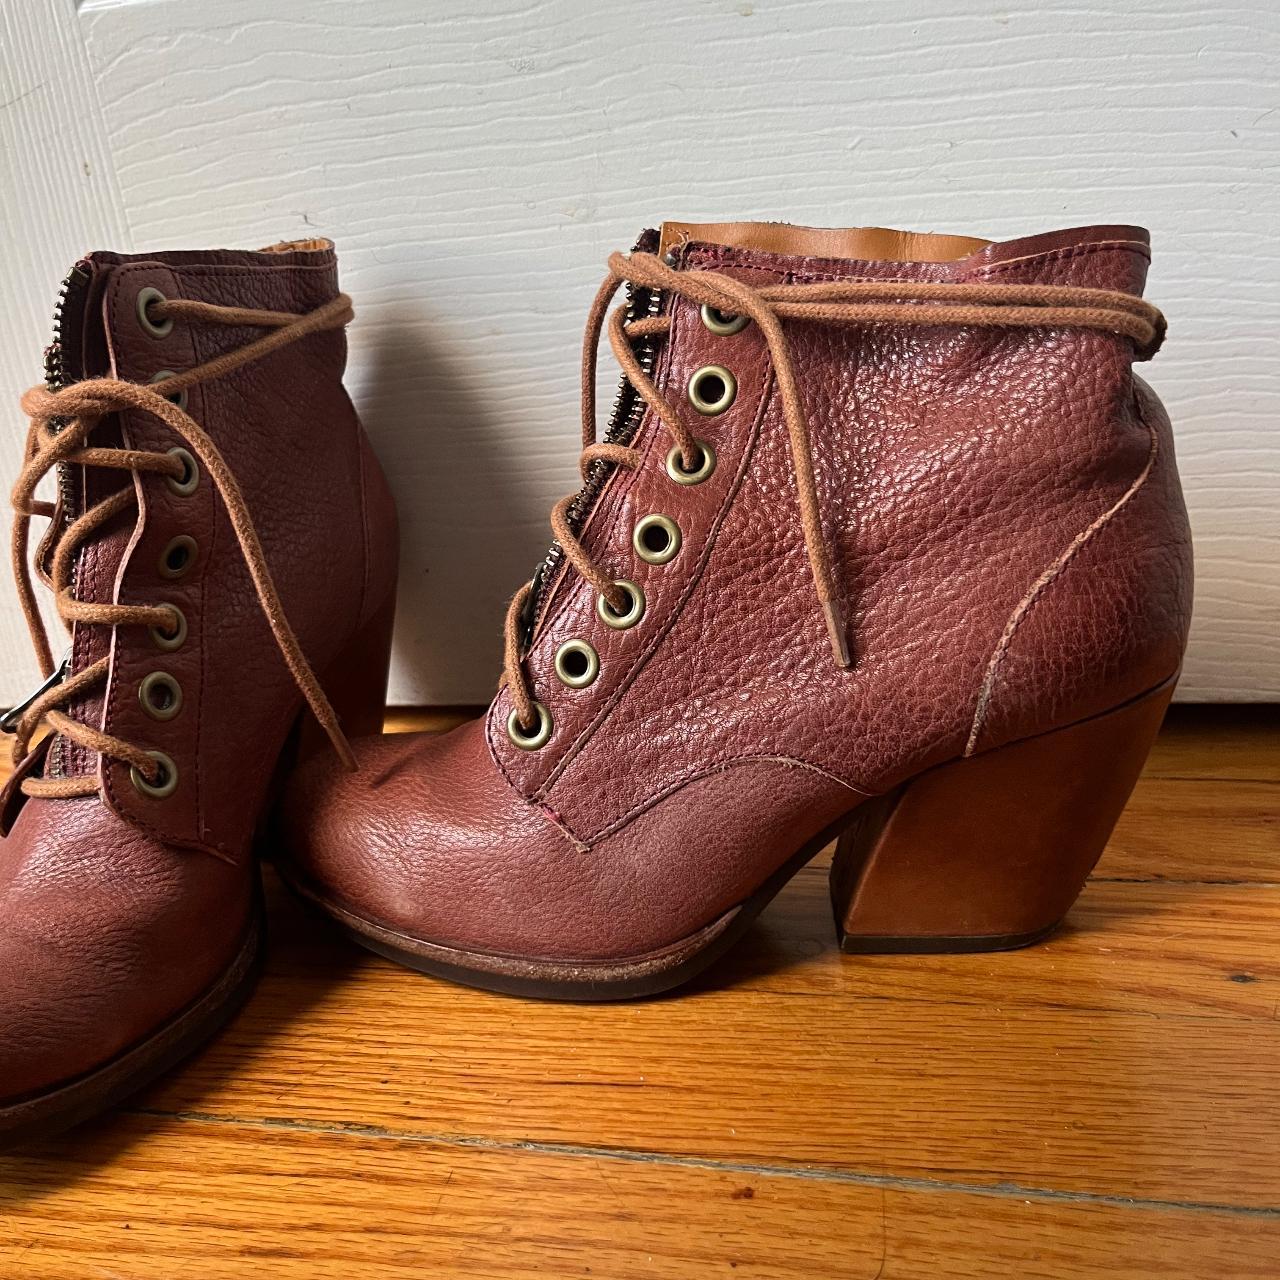 Korks Women's Tan and Burgundy Boots (3)